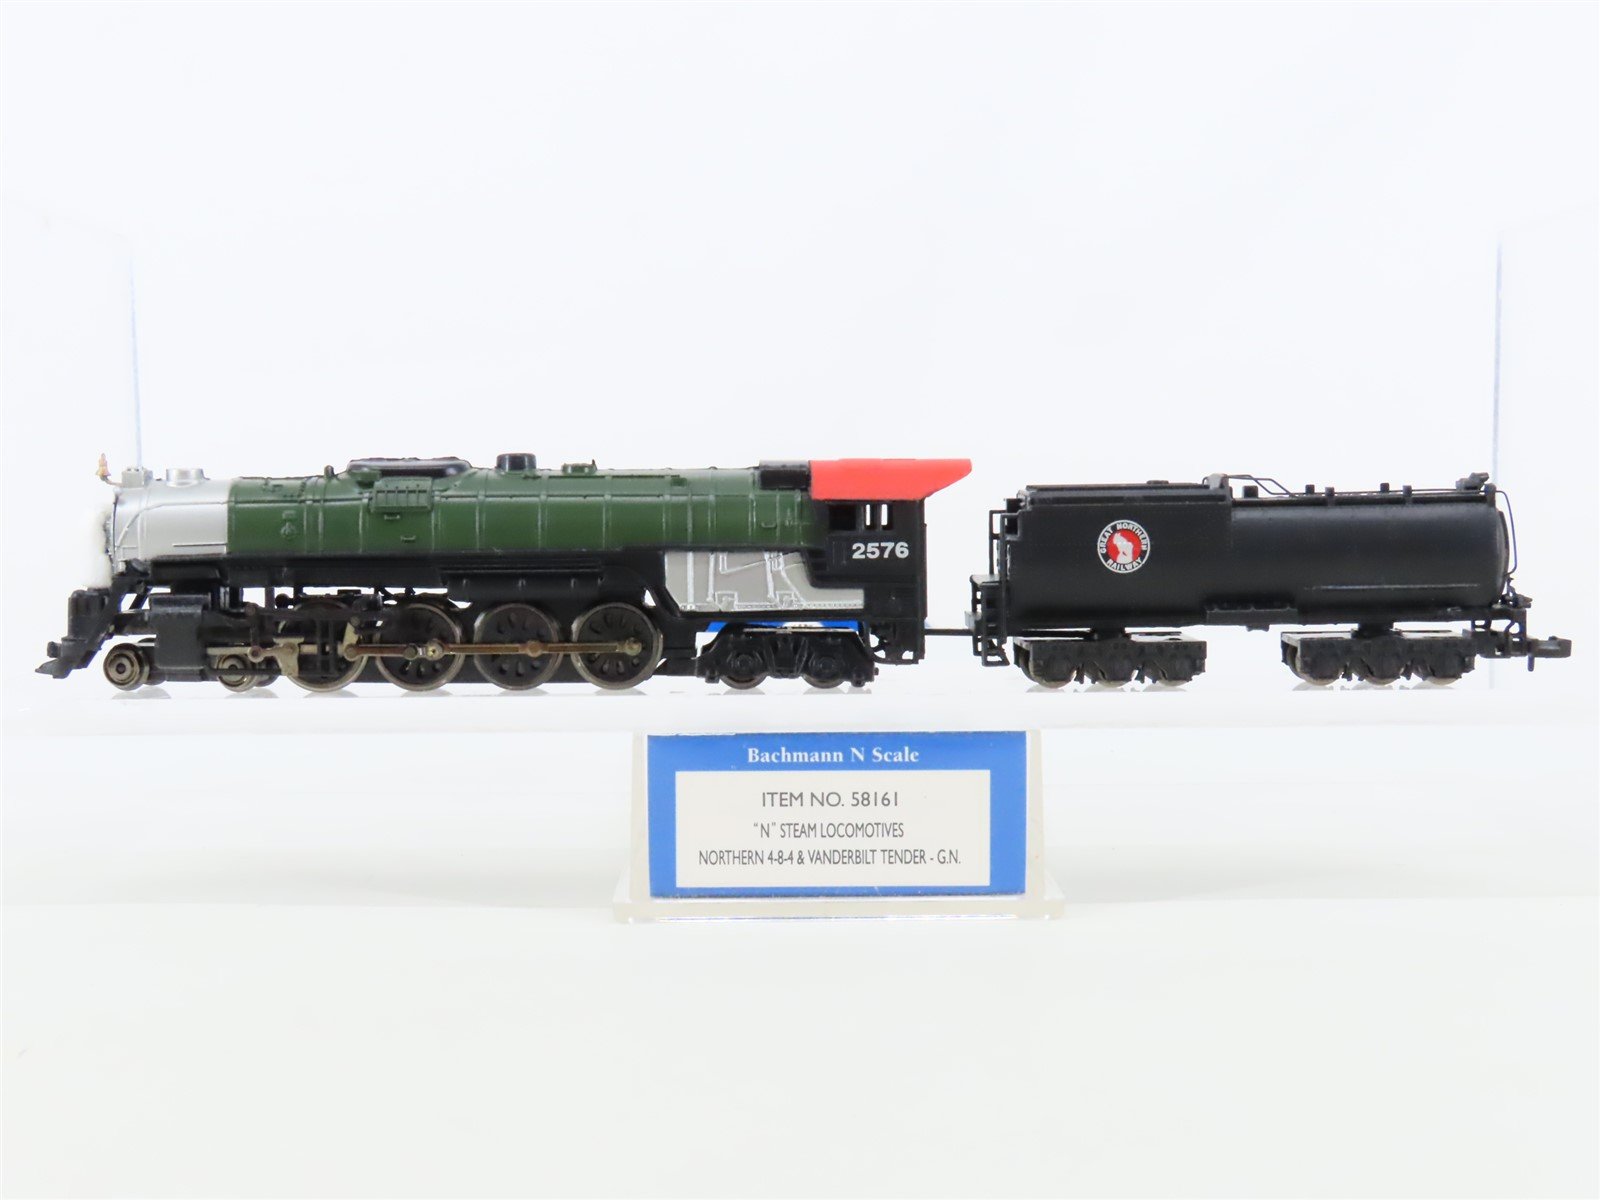 N Scale Bachmann 58161 GN Great Northern 4-8-4 Northern Steam #2576